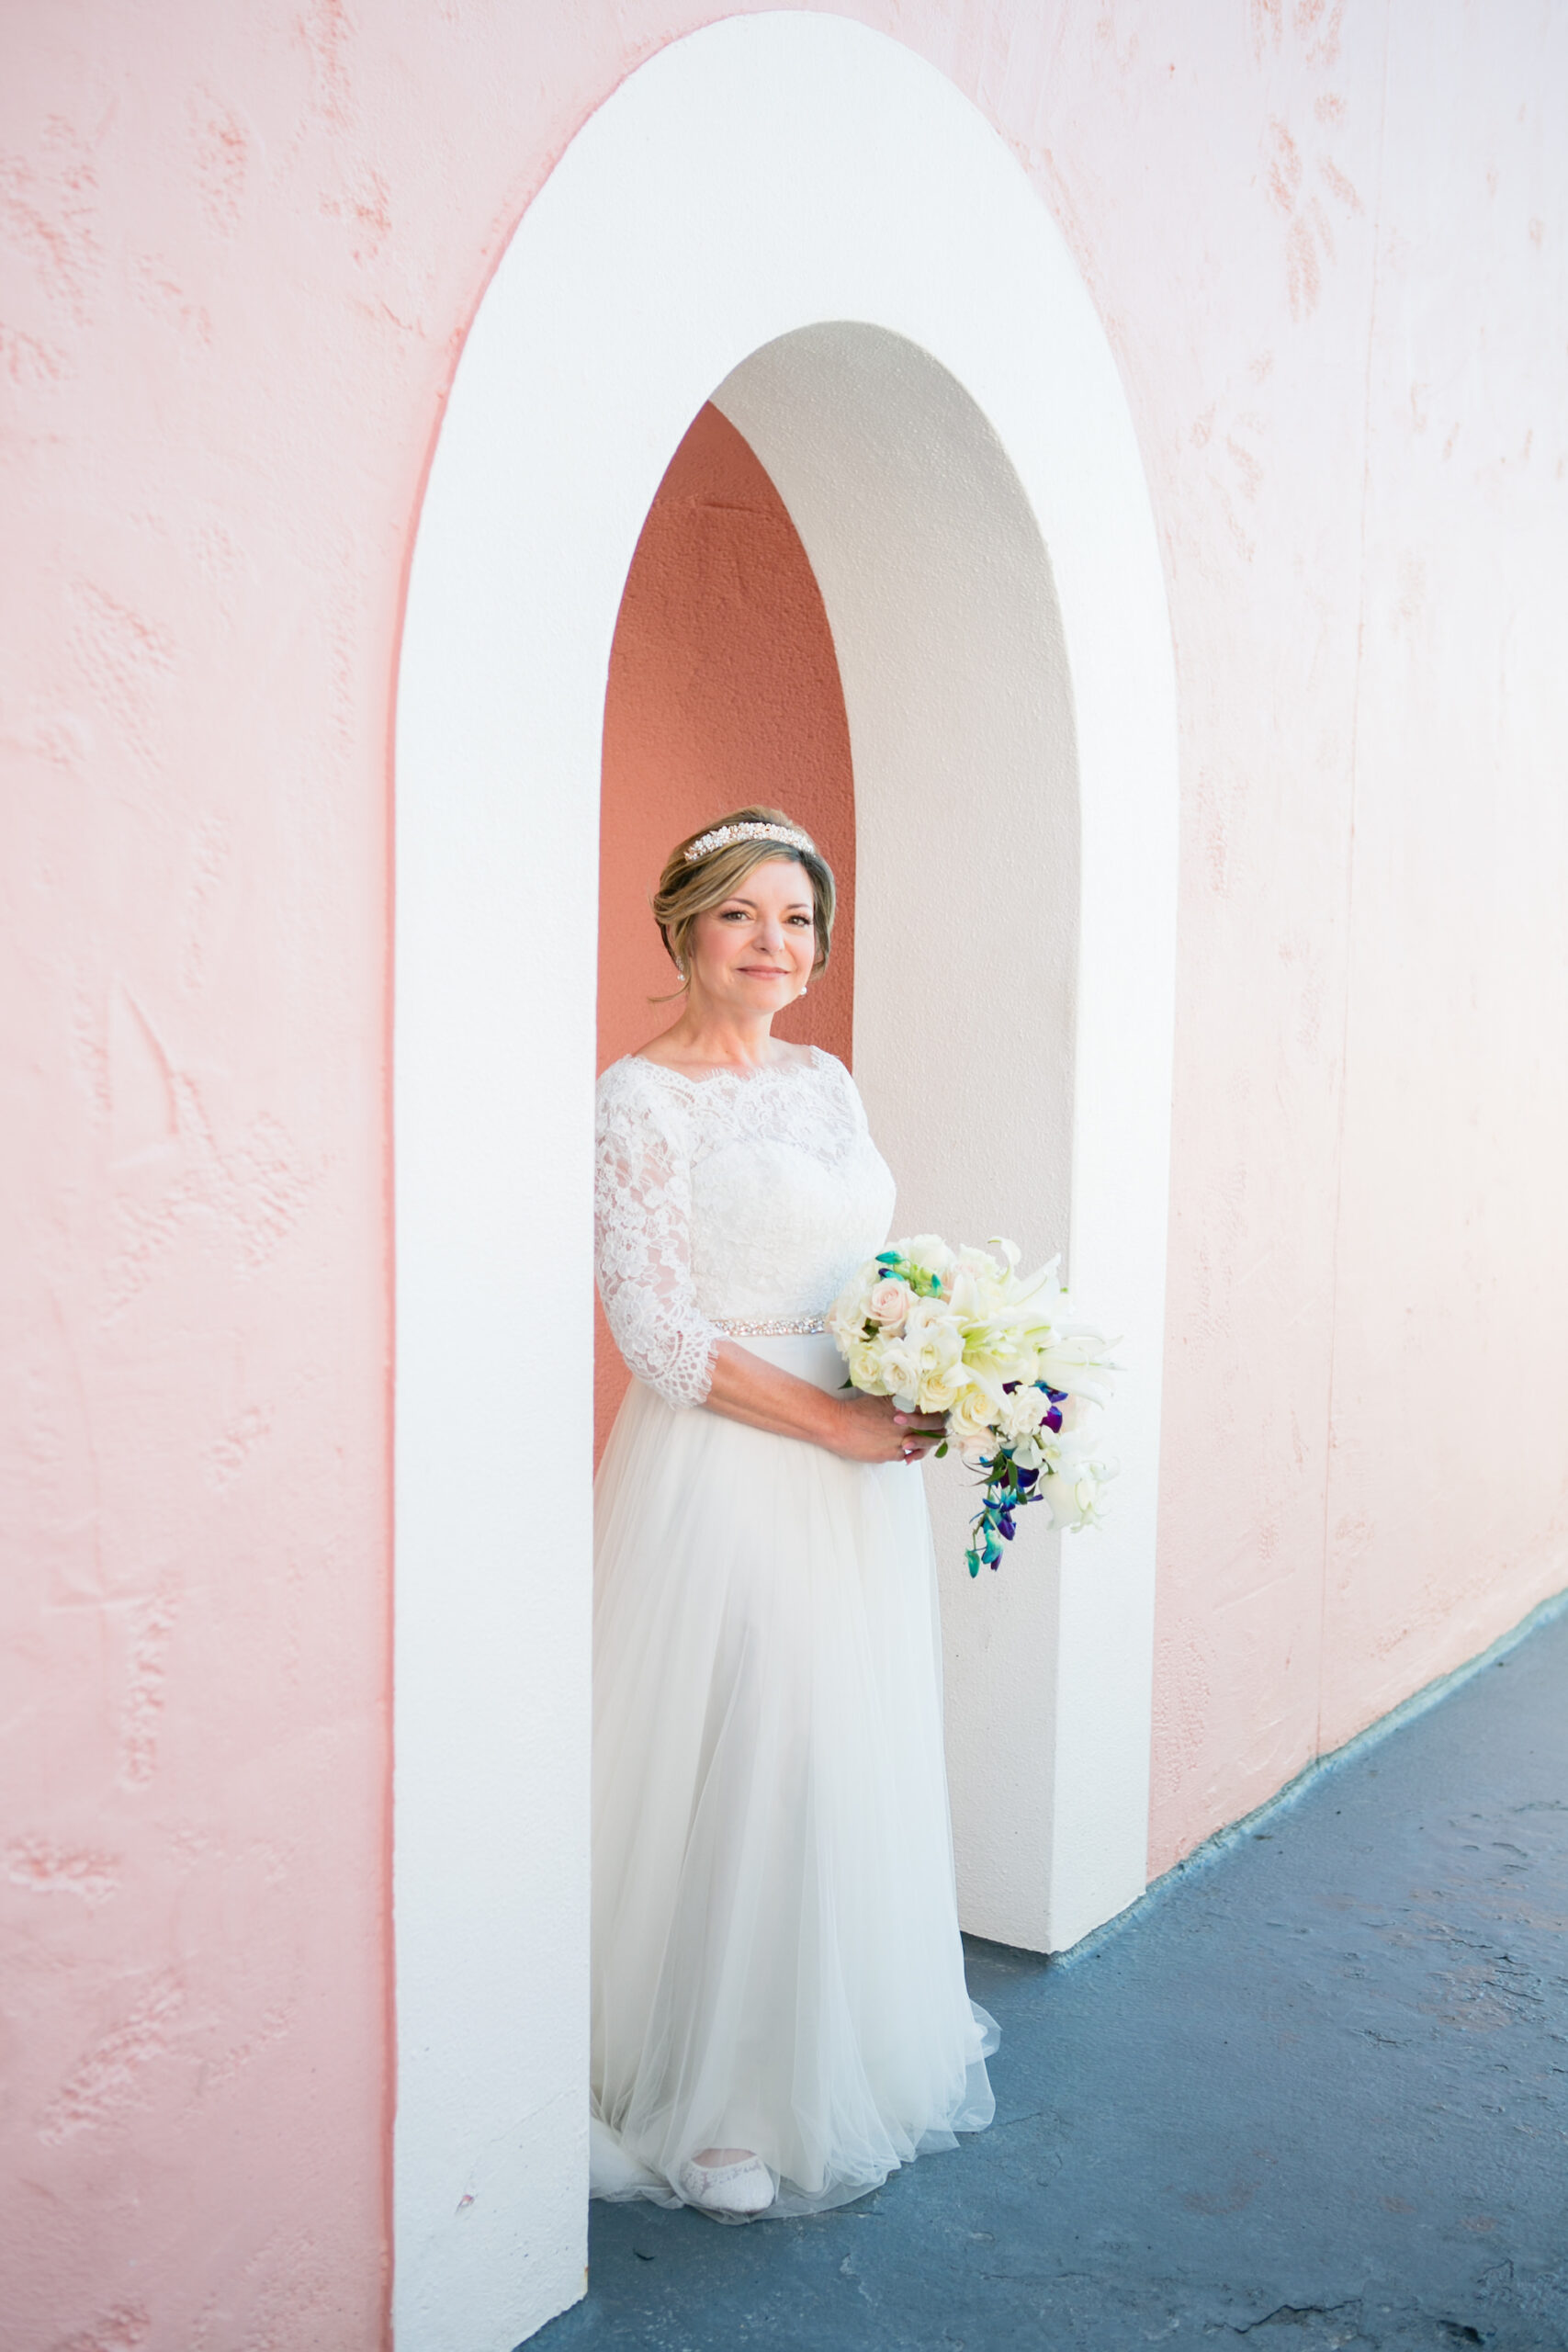 Classic Bride Wearing Lace Half Sleeve Bodice and Tulle Skirt Wedding Dress Holding White Roses and Blue Floral Bouquet | Tampa Bay Wedding Photographer Carrie Wildes Photography | Wedding Hair and Makeup Adore Bridal